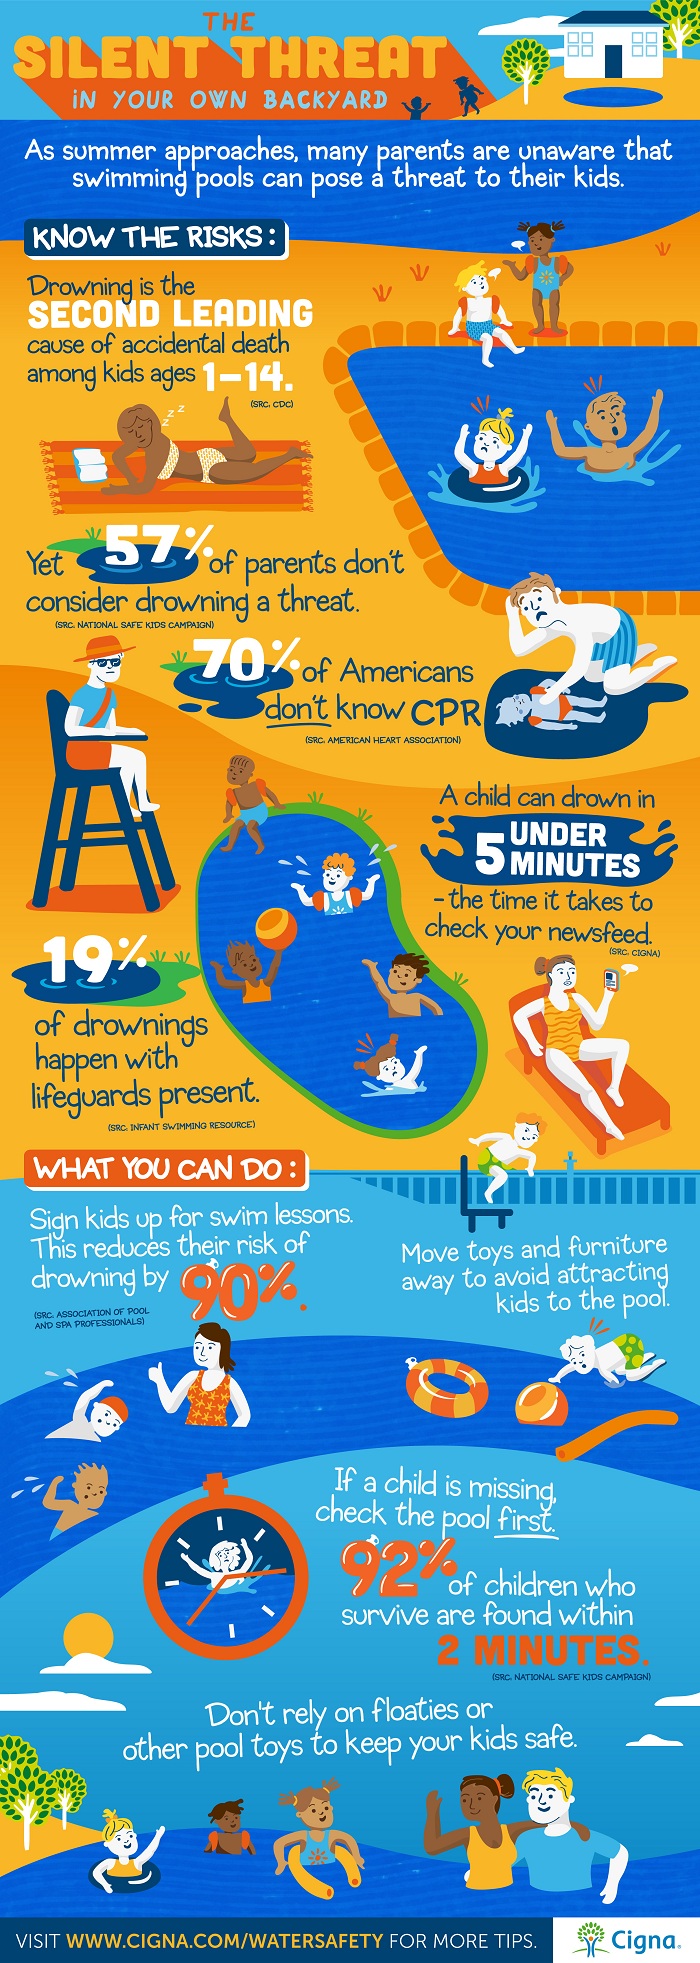 With summer in full swing, kids of all ages will be spending the next three months splashing around in the pool. But did you know that drowning is the second leading cause of death in children 1-14? Here are 5 ways to prevent drowning this summer.